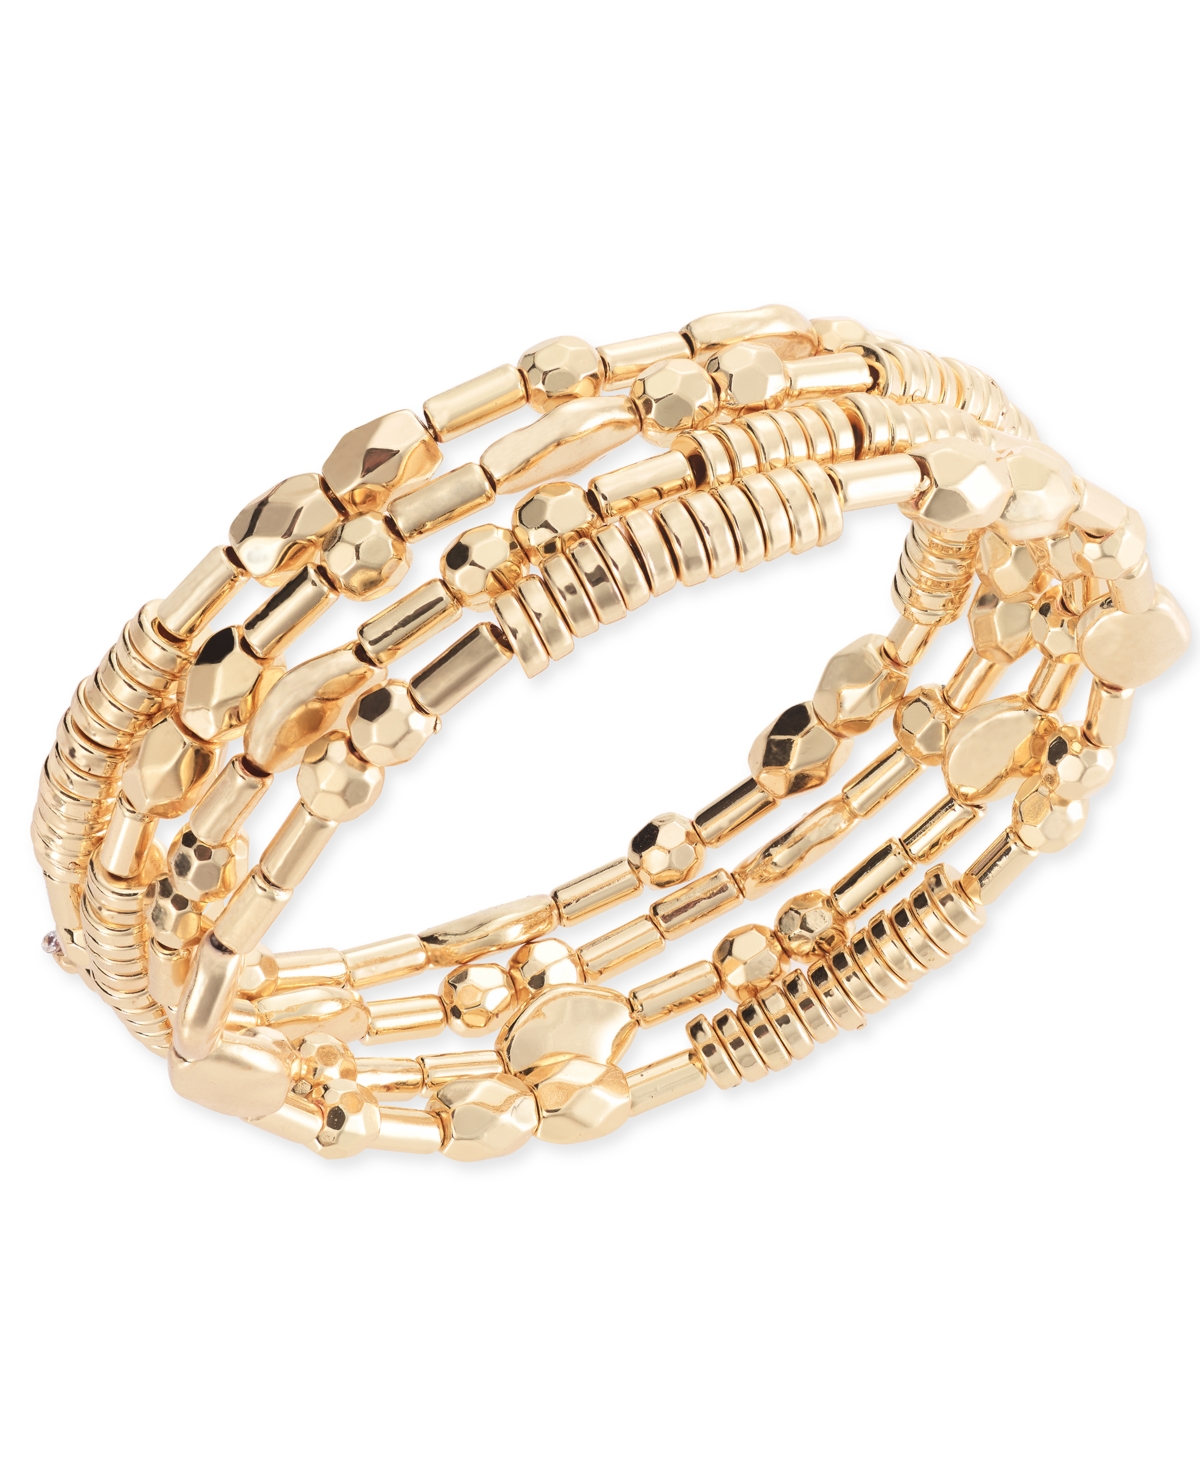 Silver-Tone Beaded Multi-Row Coil Bracelet, Created for Macy's - Gold